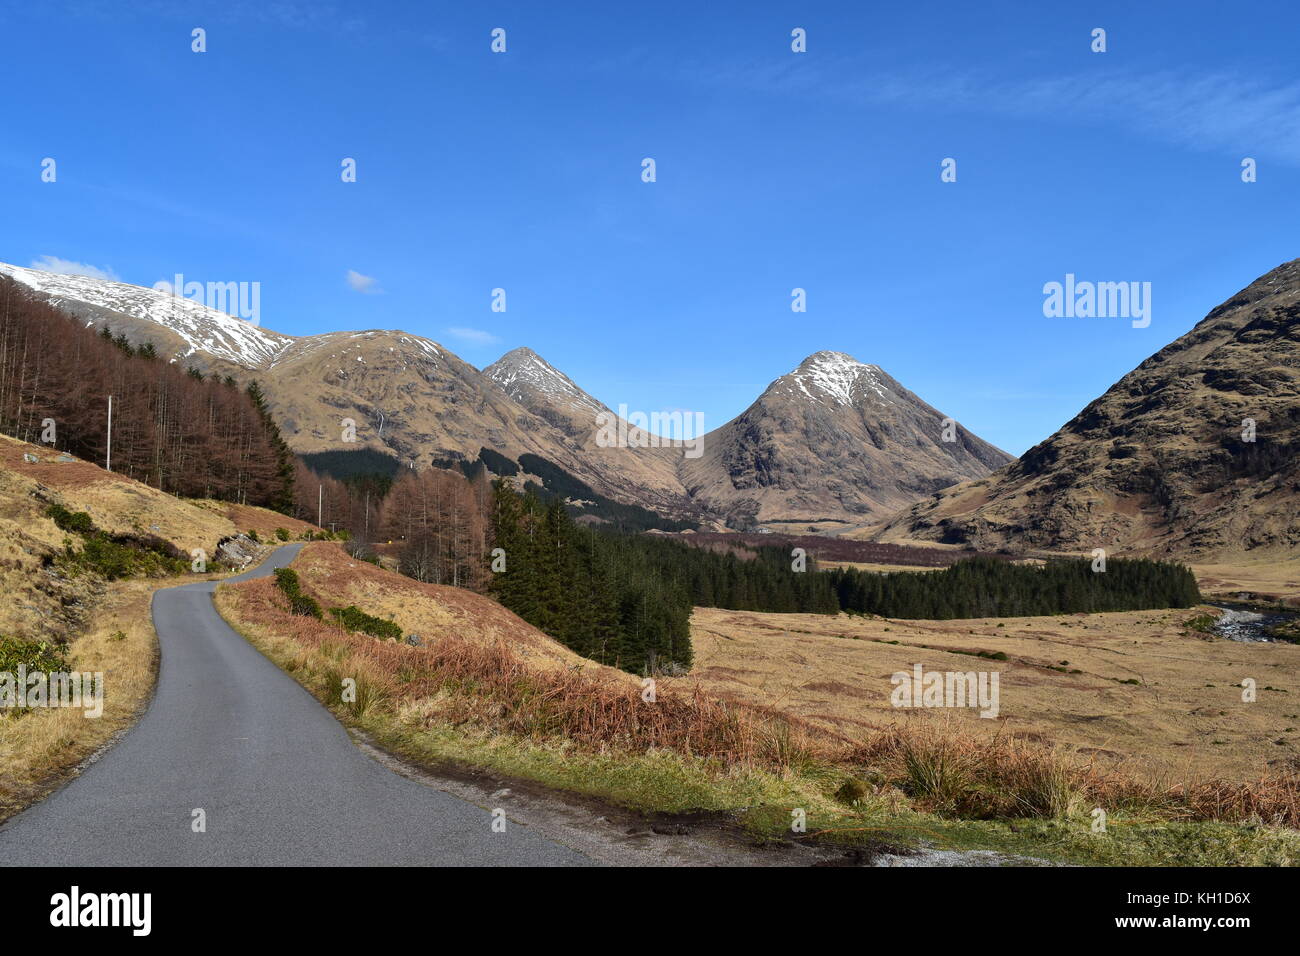 Buachaille Etive Beag and Buachaille Etive Mor U-shaped valley on a sunny day in Glencoe, taken from the road at Glen Etive Stock Photo